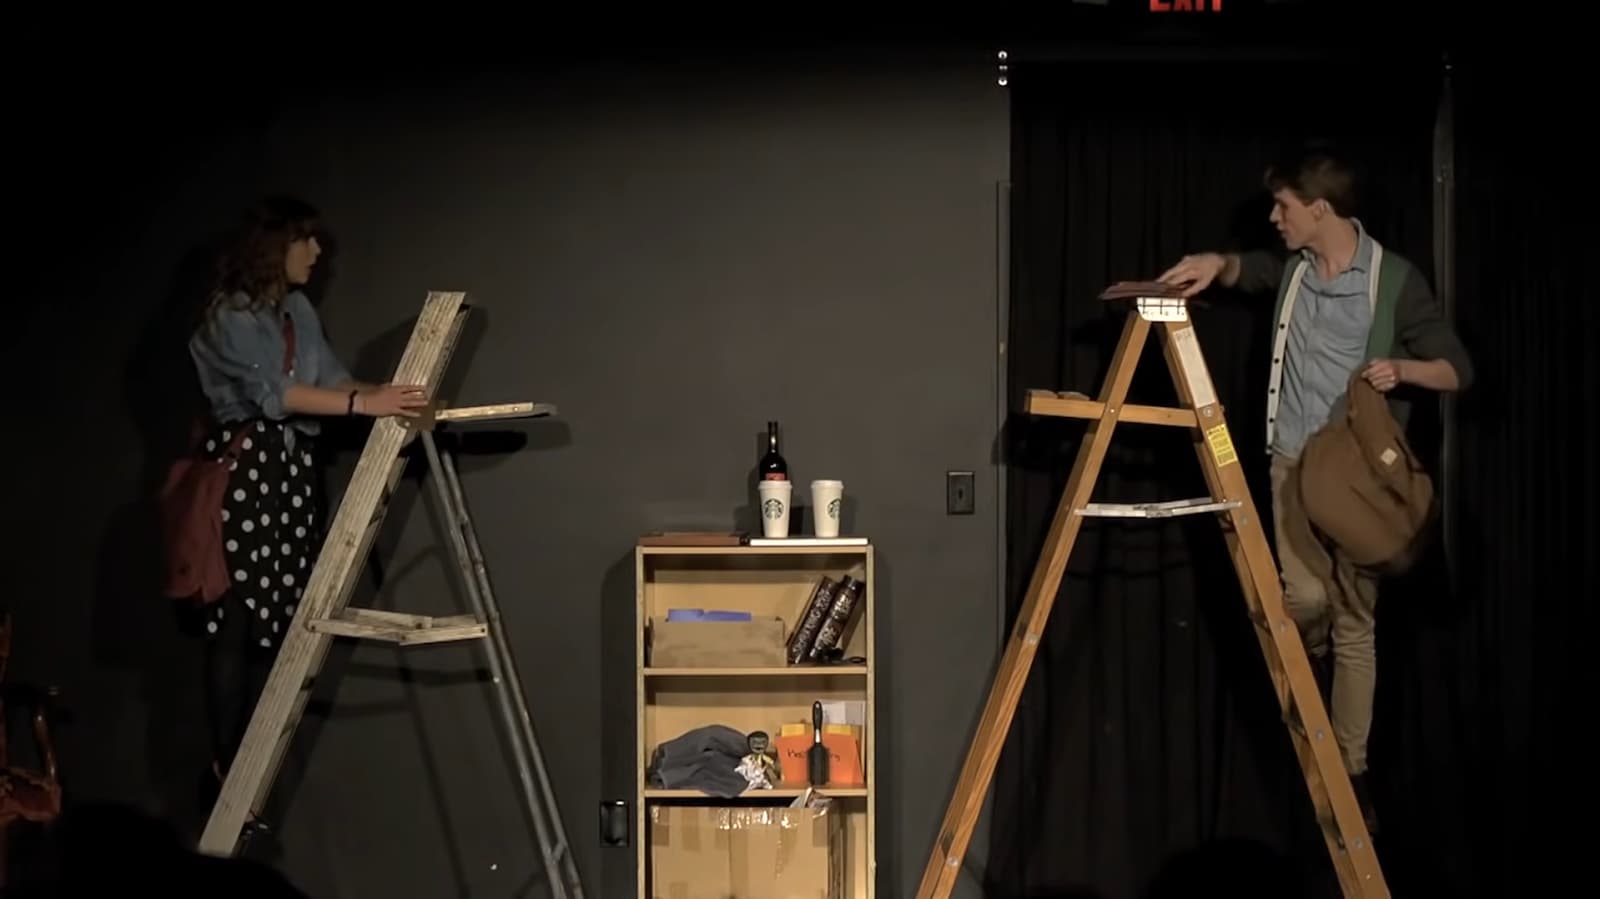 Two actors on ladders face each other on a dimly lit stage